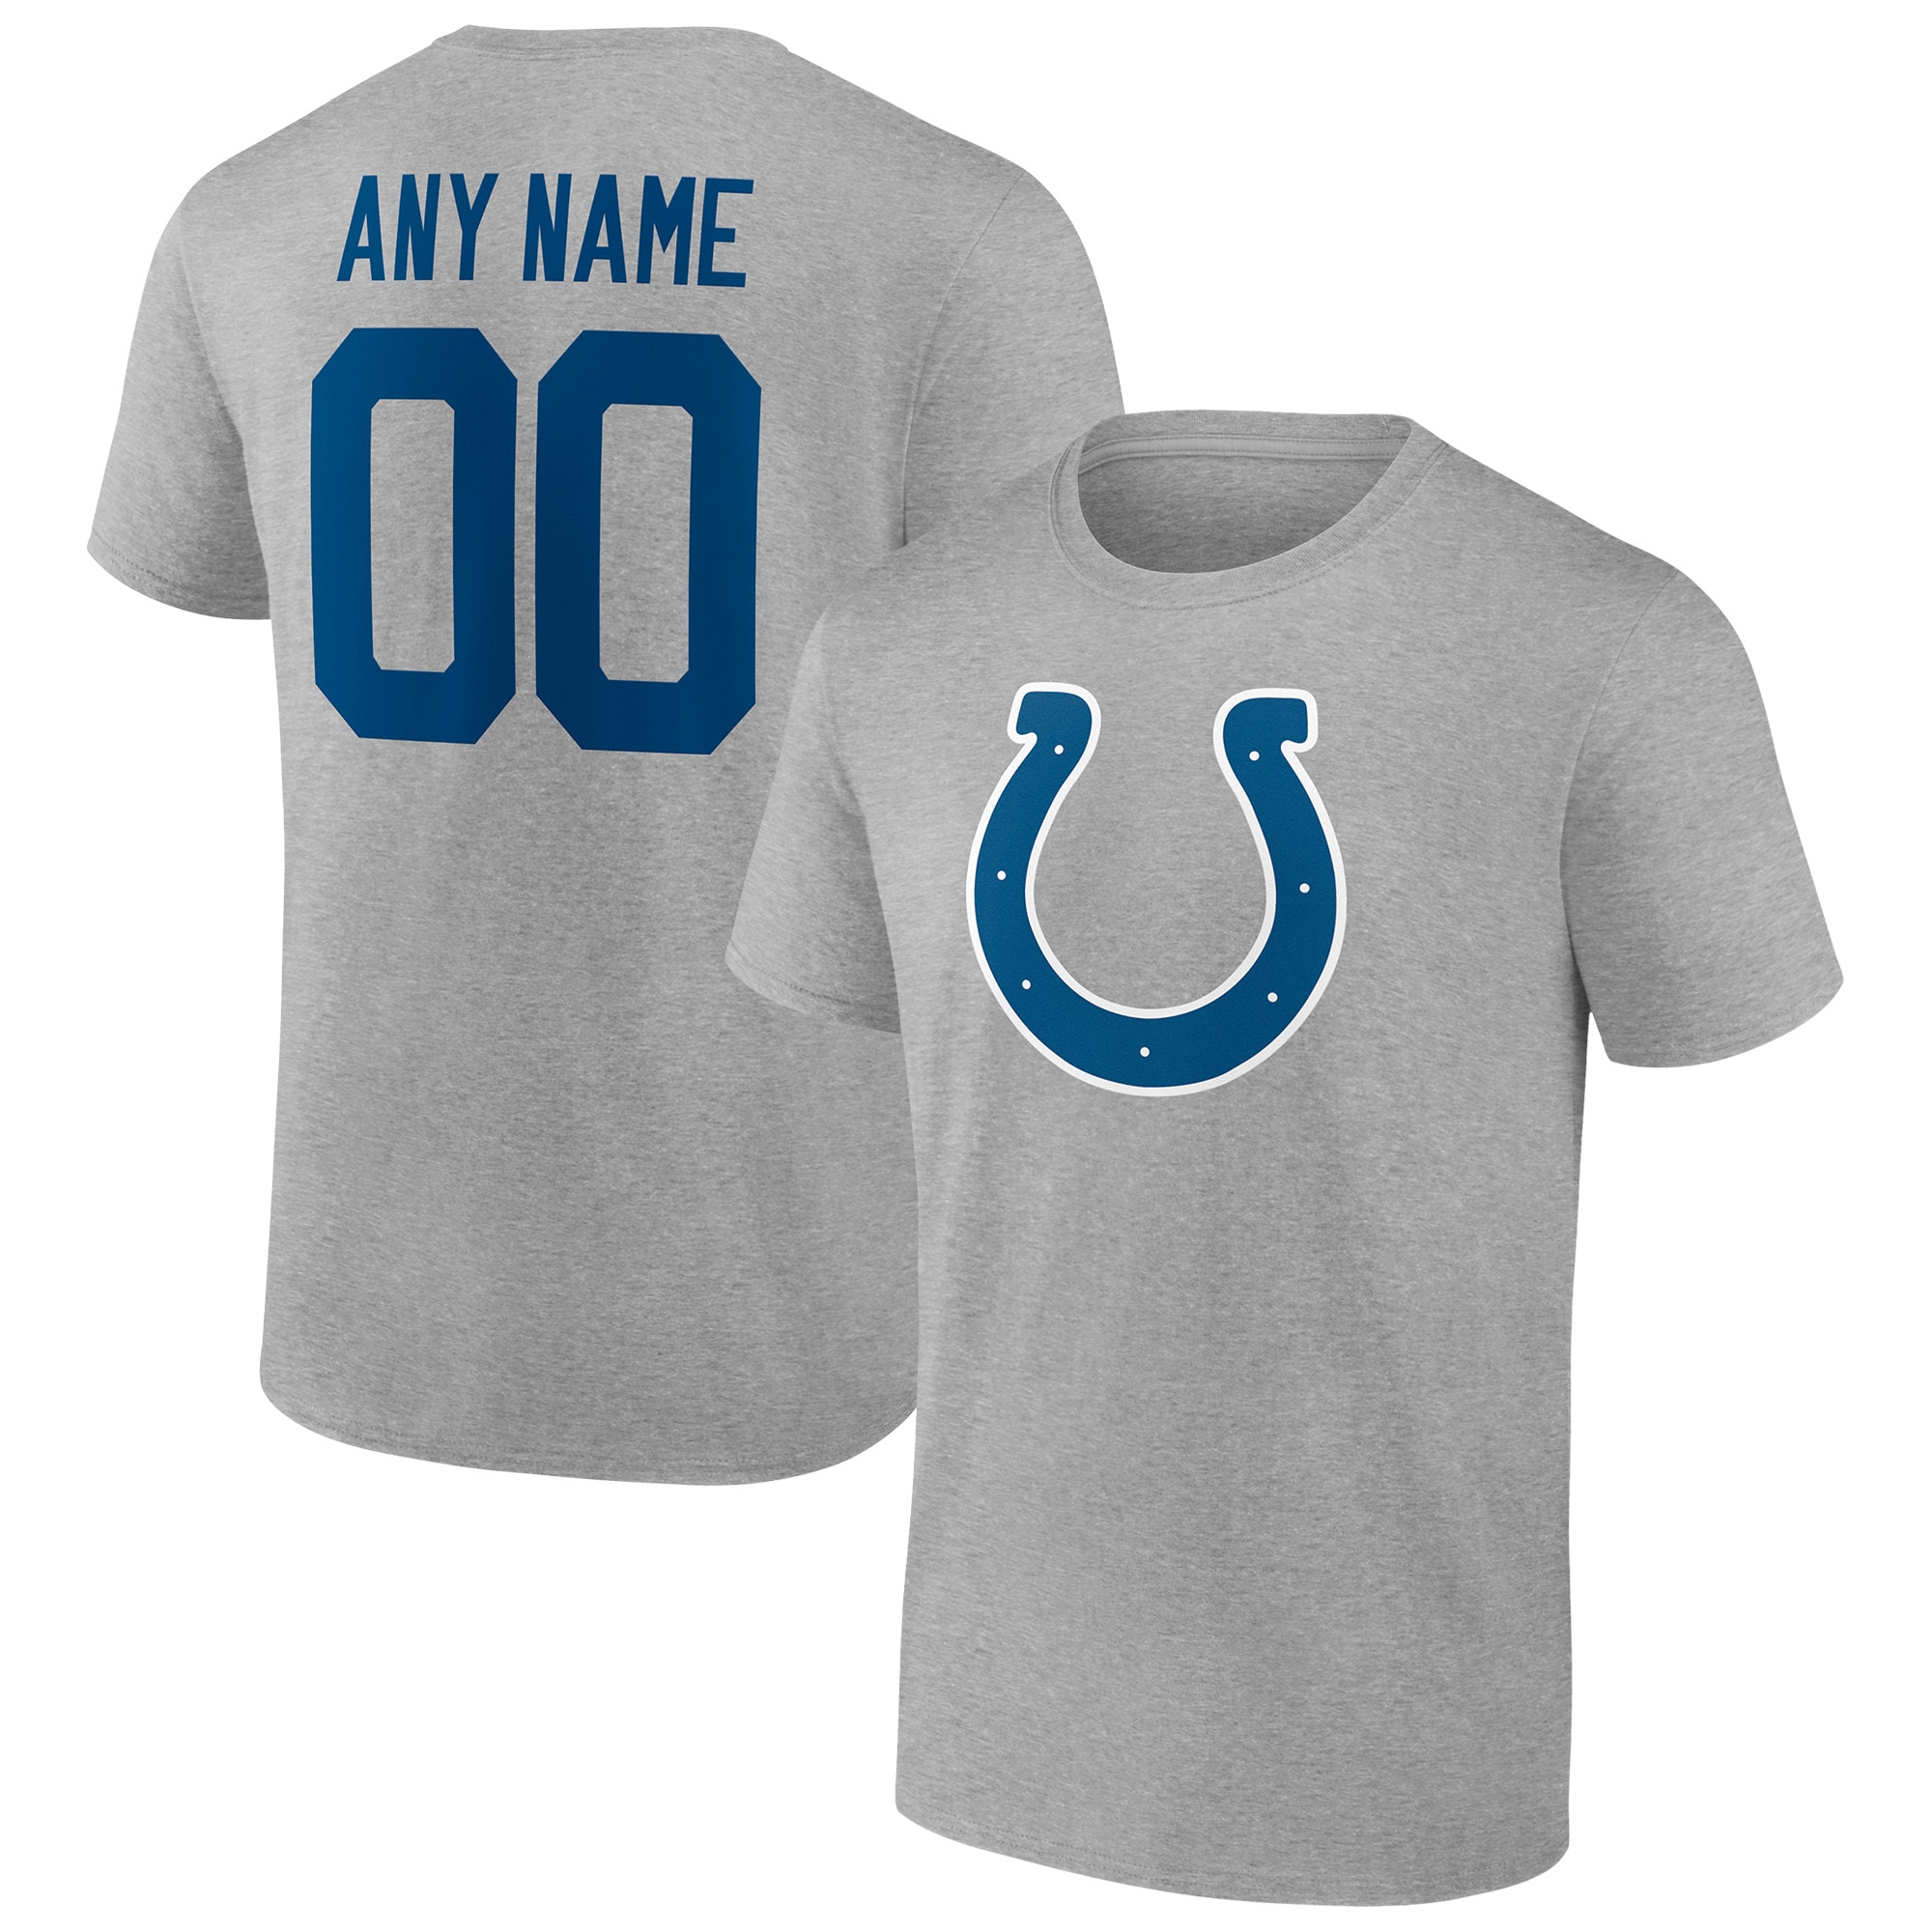 Indianapolis Colts Custom Team Authentic T Shirt